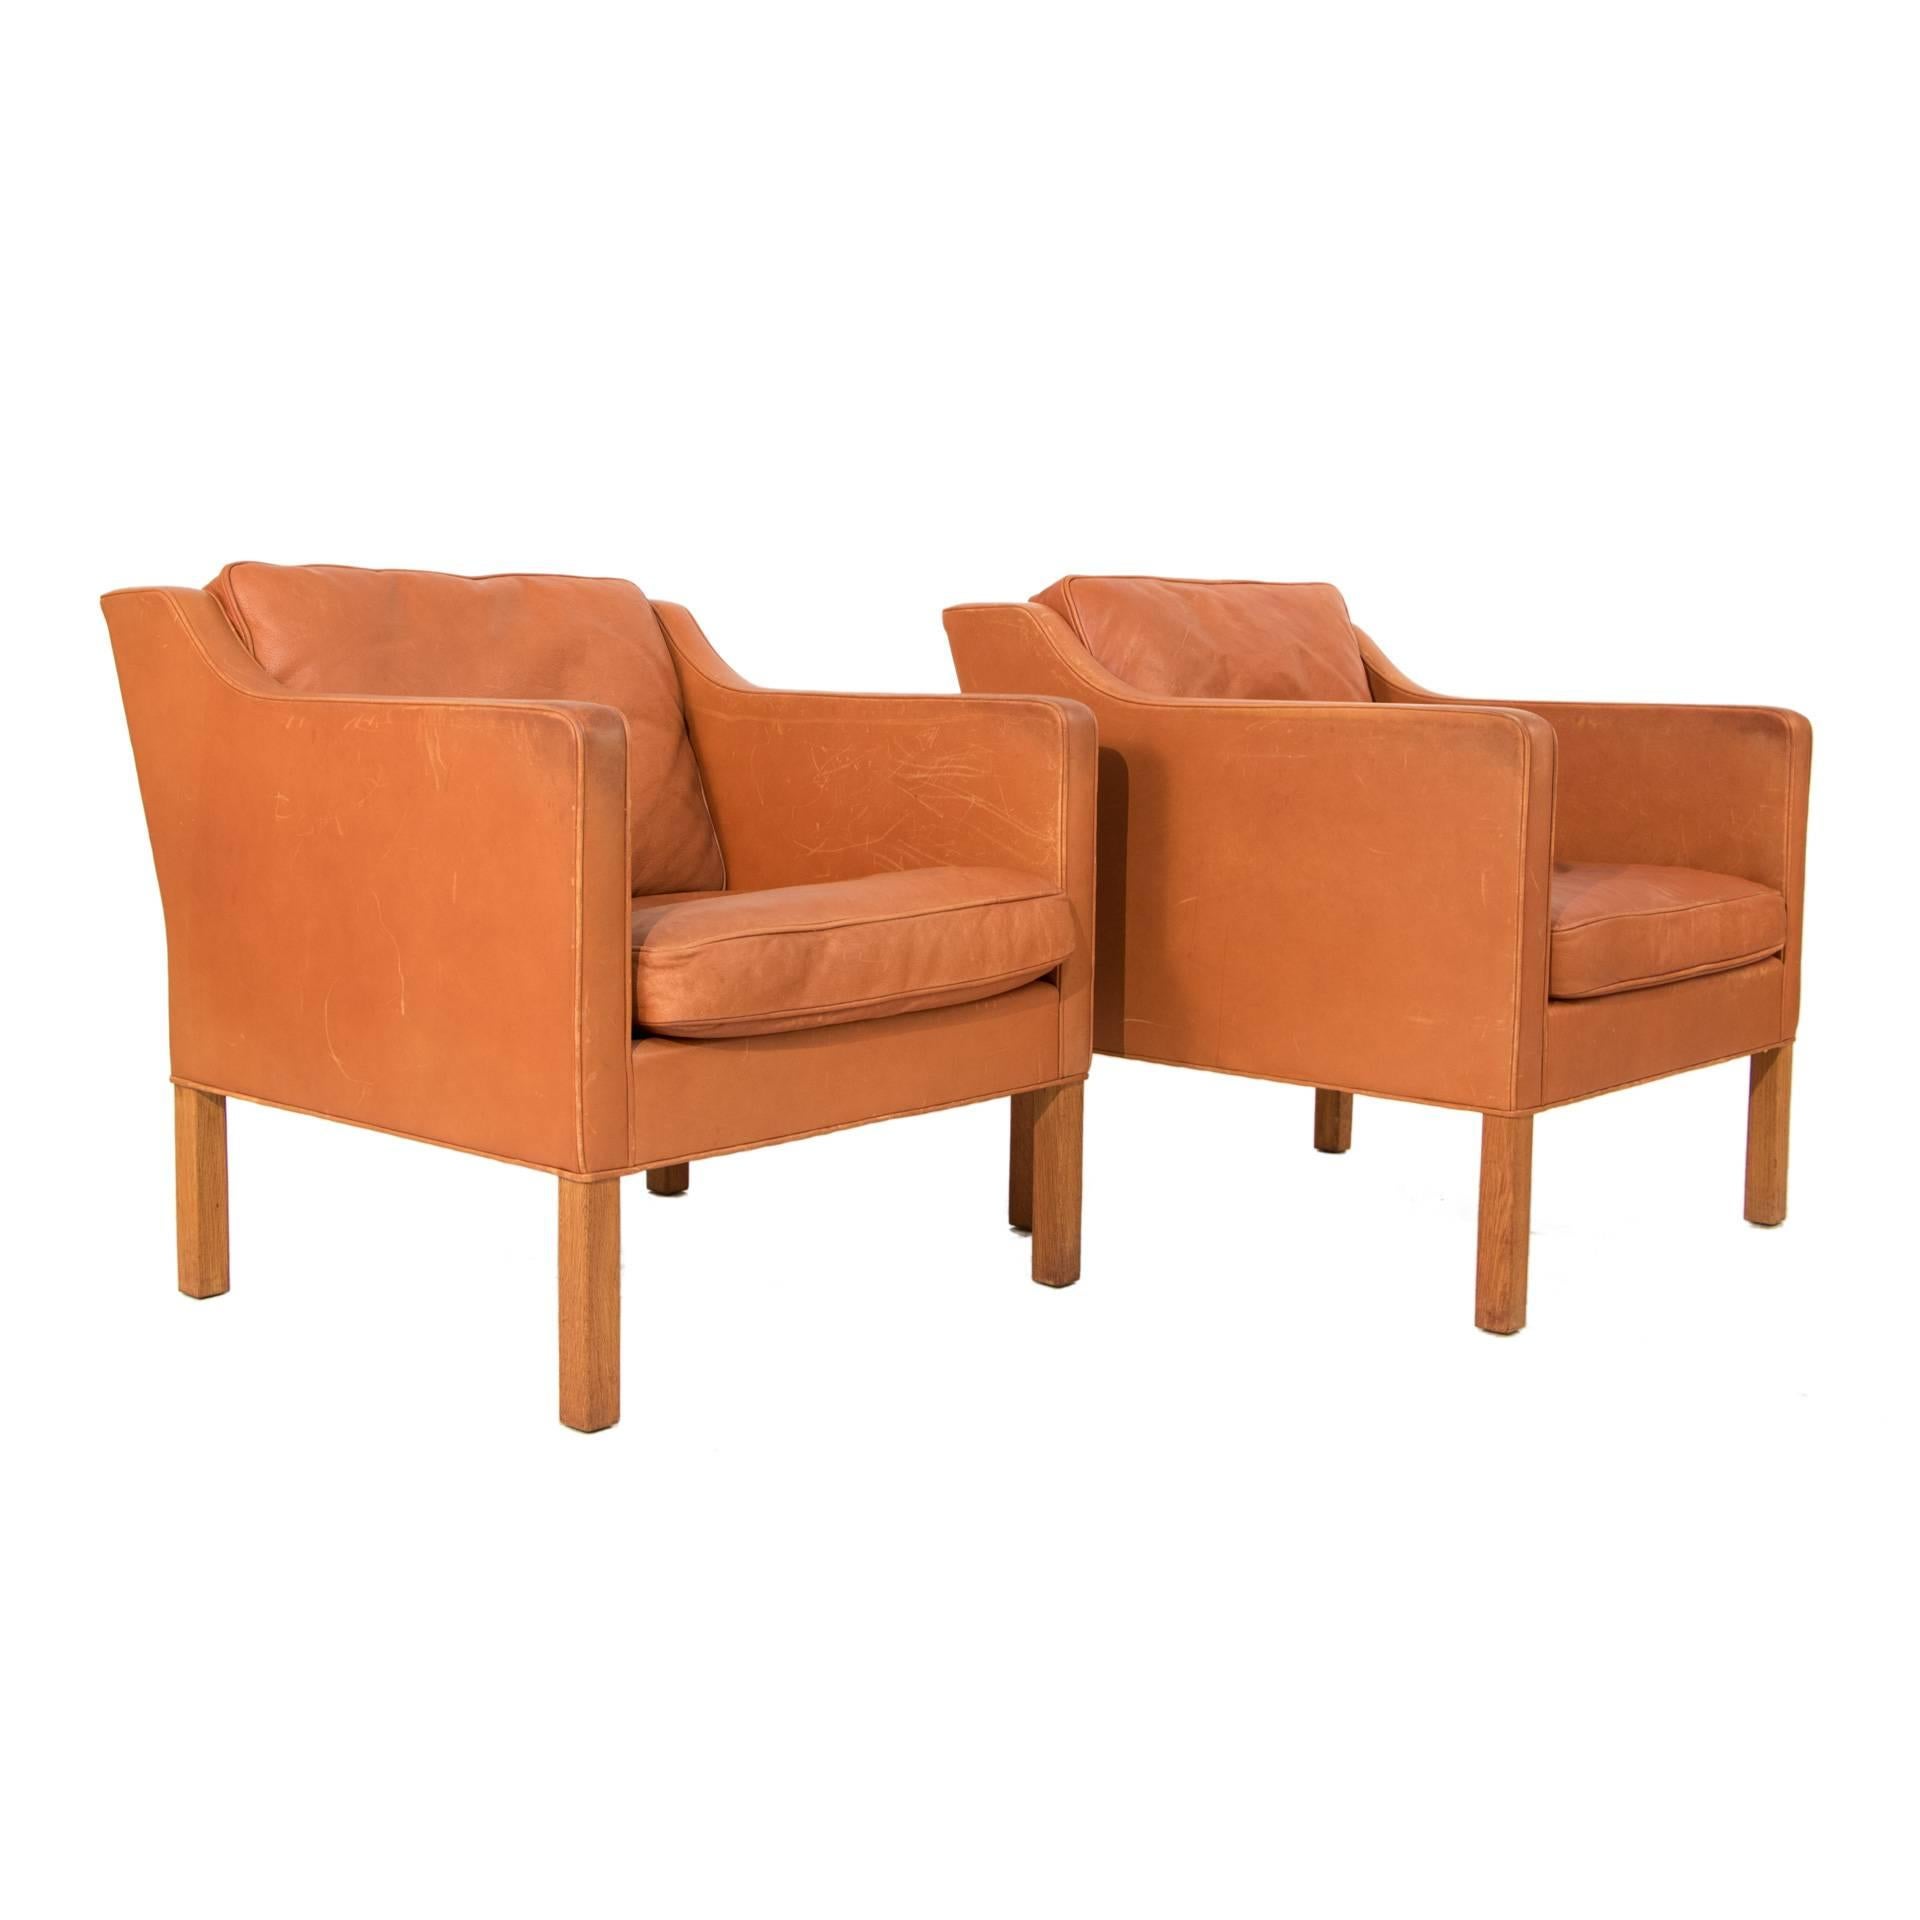 Pair of leather club chairs by Børge Mogensen.